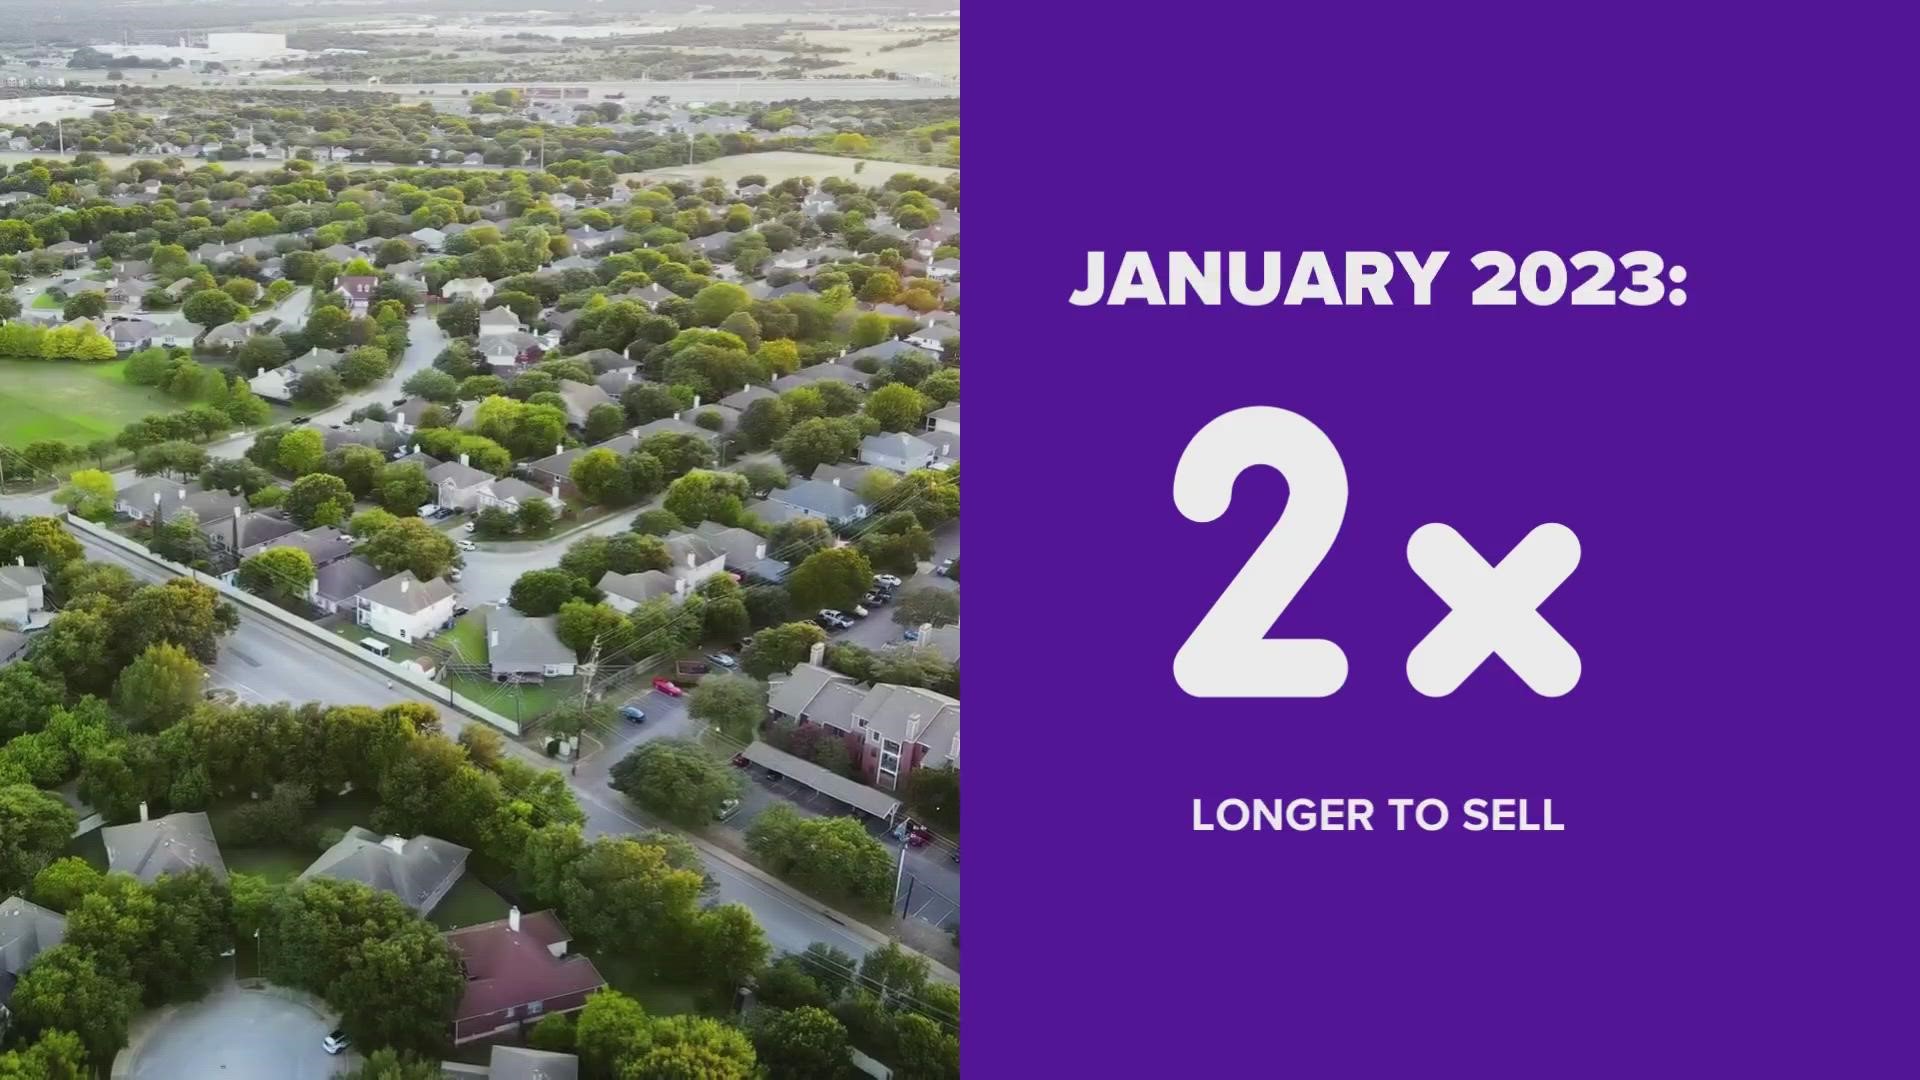 The average DFW home lingered on the market for 56 days in January compared to 29 days in January 2022.